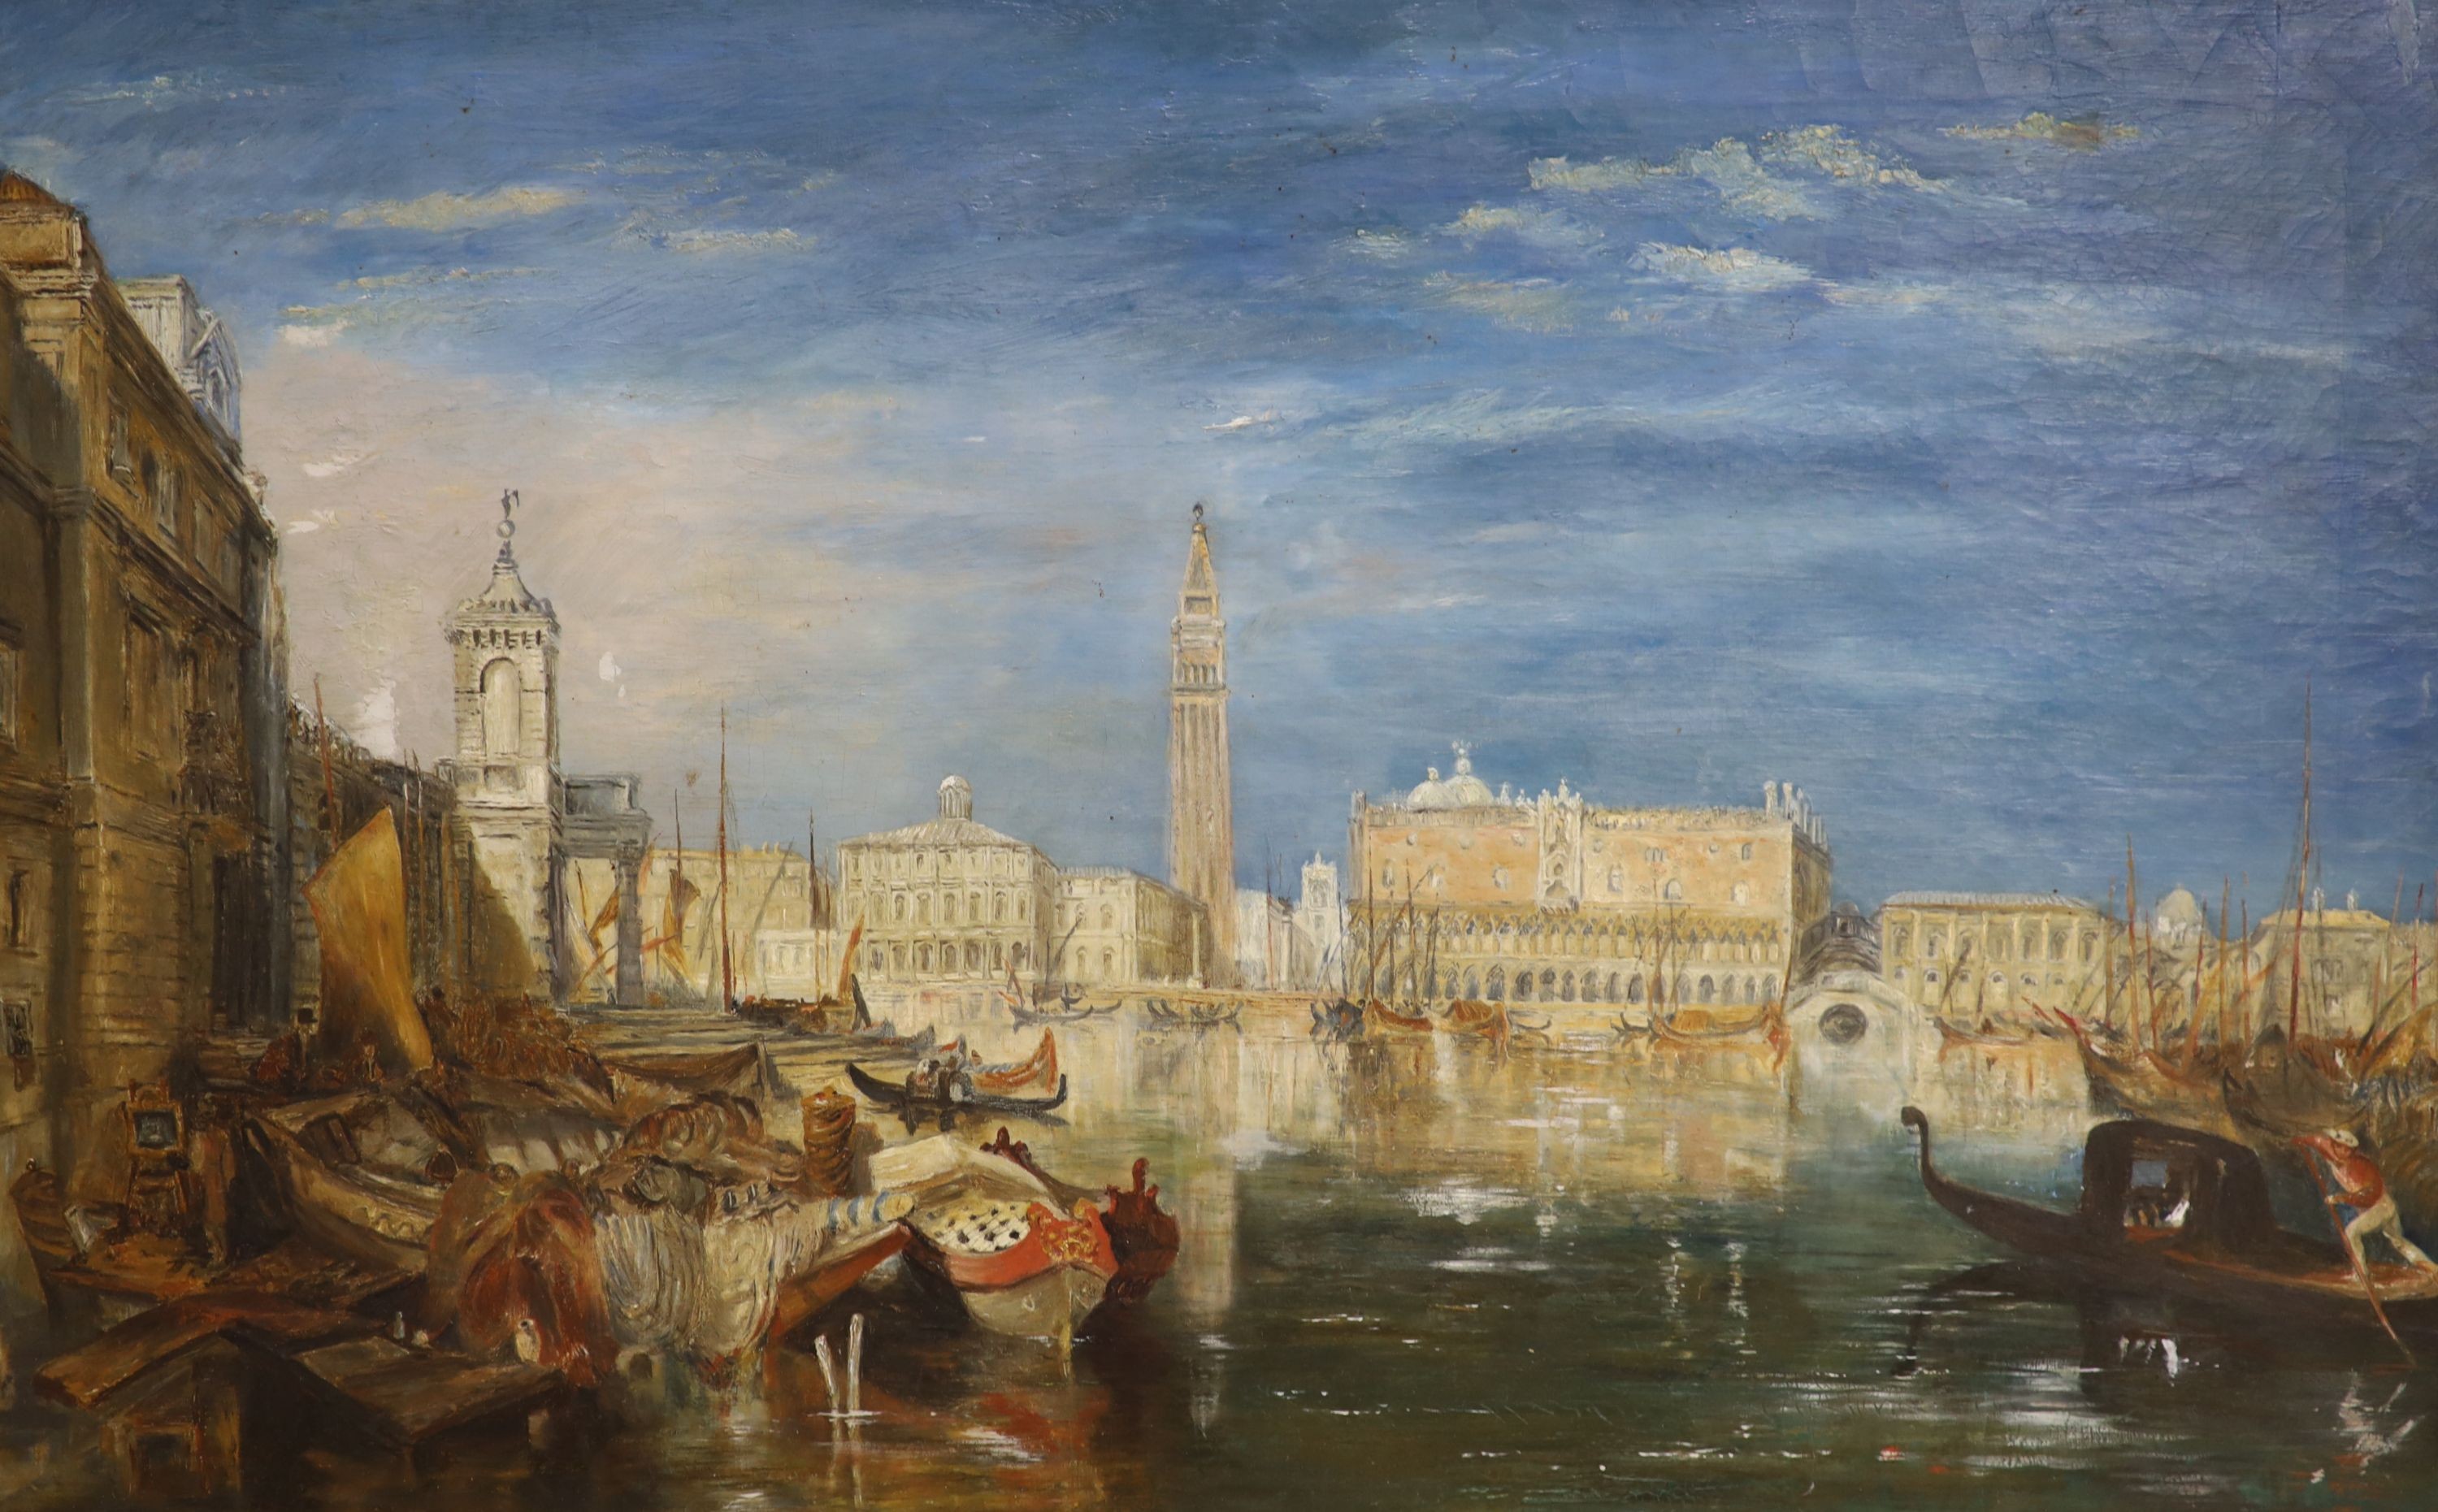 After Turner, oil on canvas, Bridge of Sighs, ducal palace and customhouse, Venice, 50 x 80cm